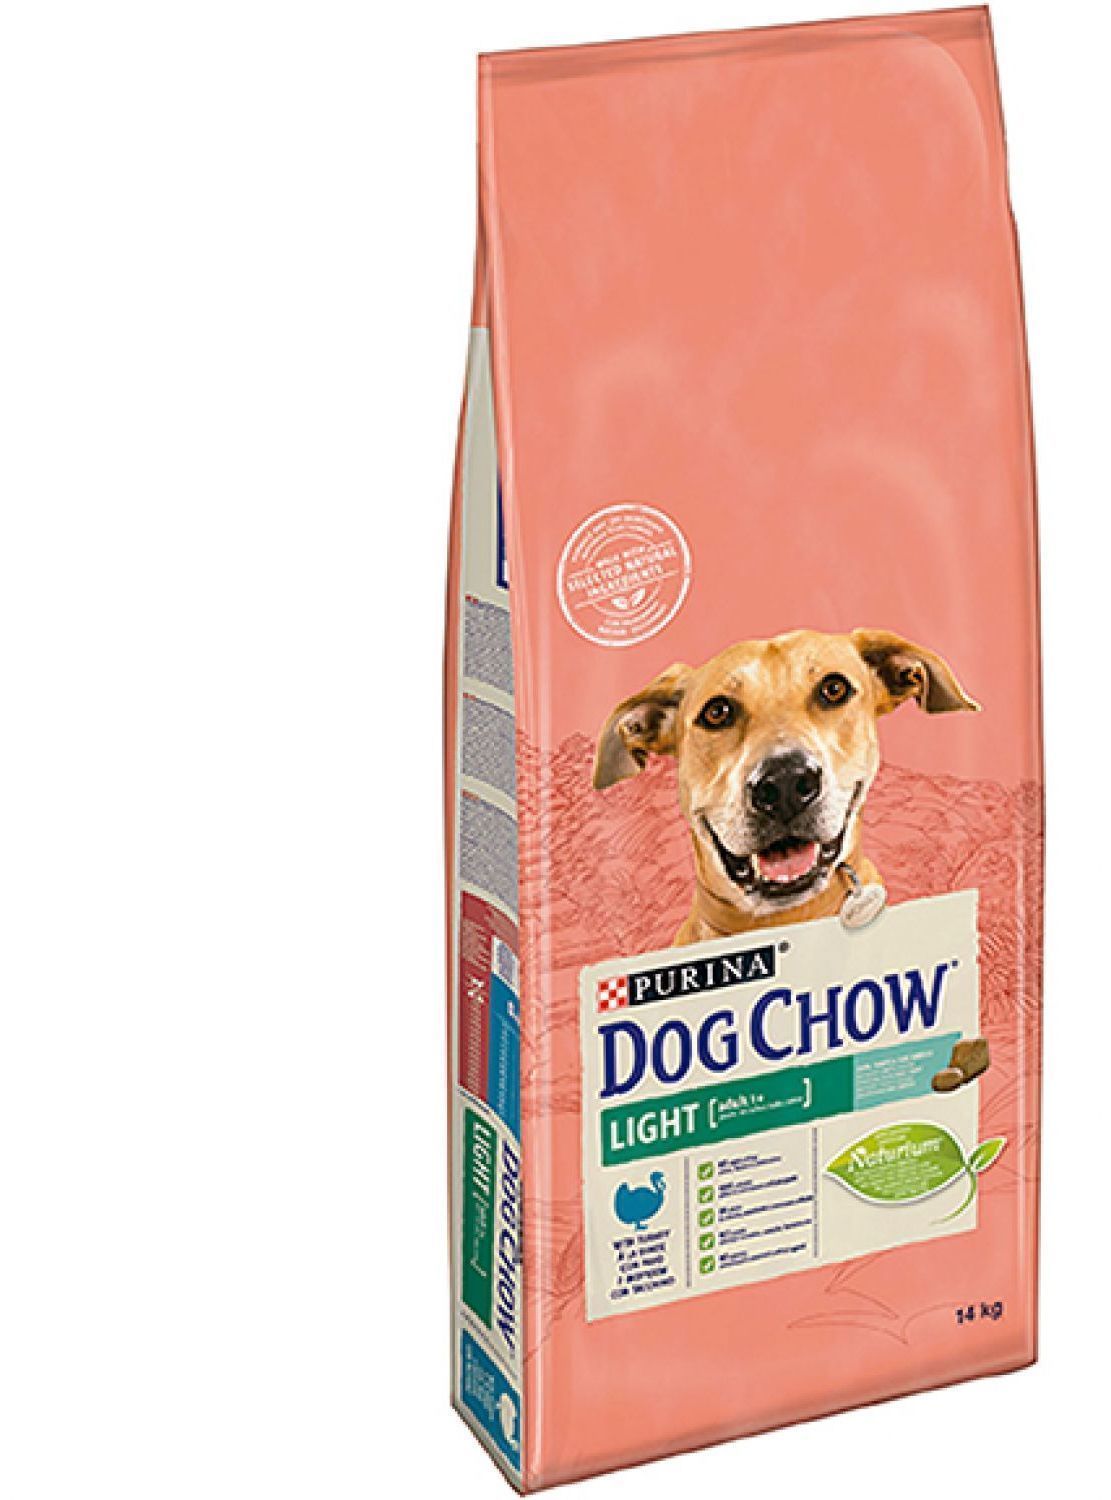 Croquettes Chien Dog Chow Light Dinde 14kg - PURINA